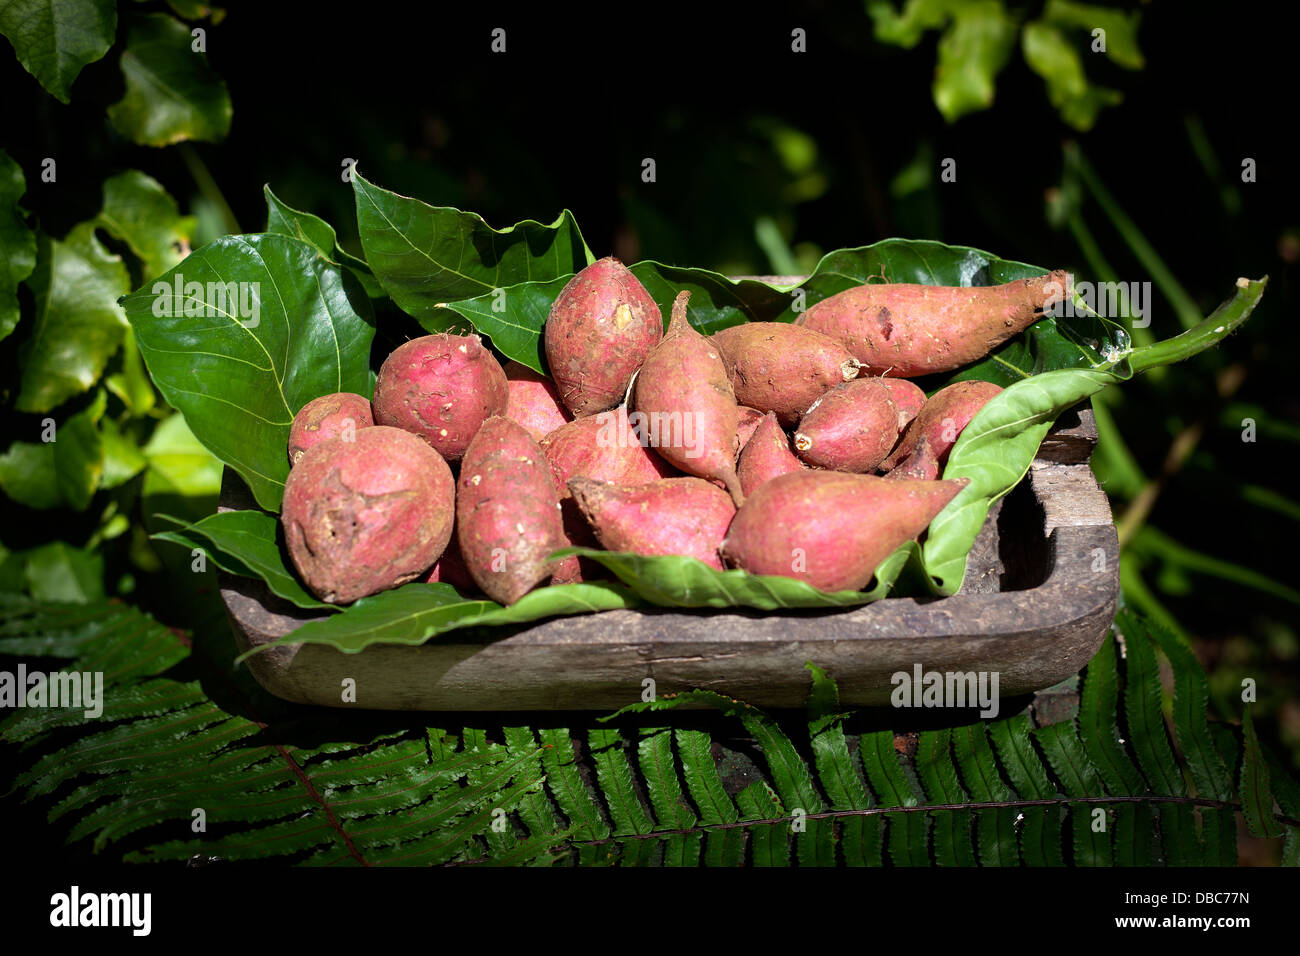 Organic sweet red potatoes in a wooden bowl ready for sale at a vegetable market in Aitutaki Island, Cook Islands Stock Photo